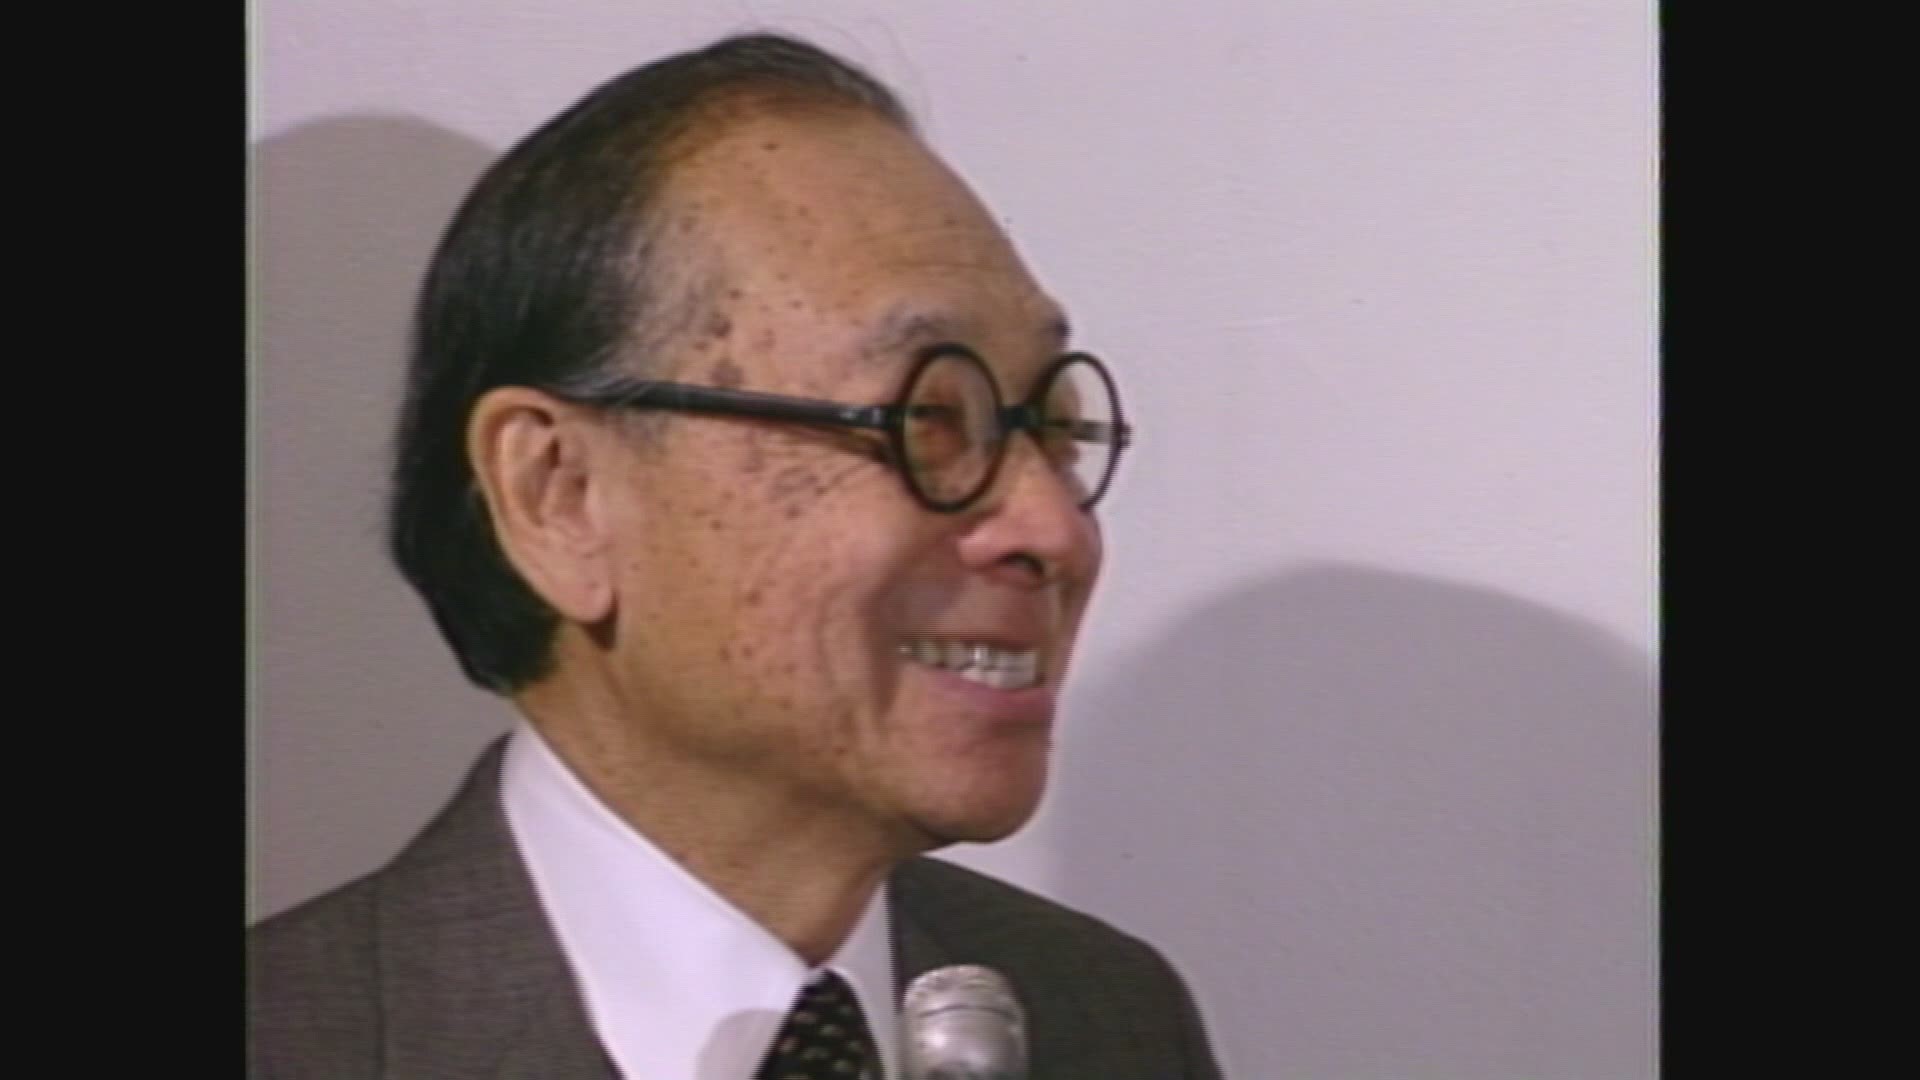 A look back: I.M. Pei speaks at Rock & Roll Hall of Fame design unveil in 1988